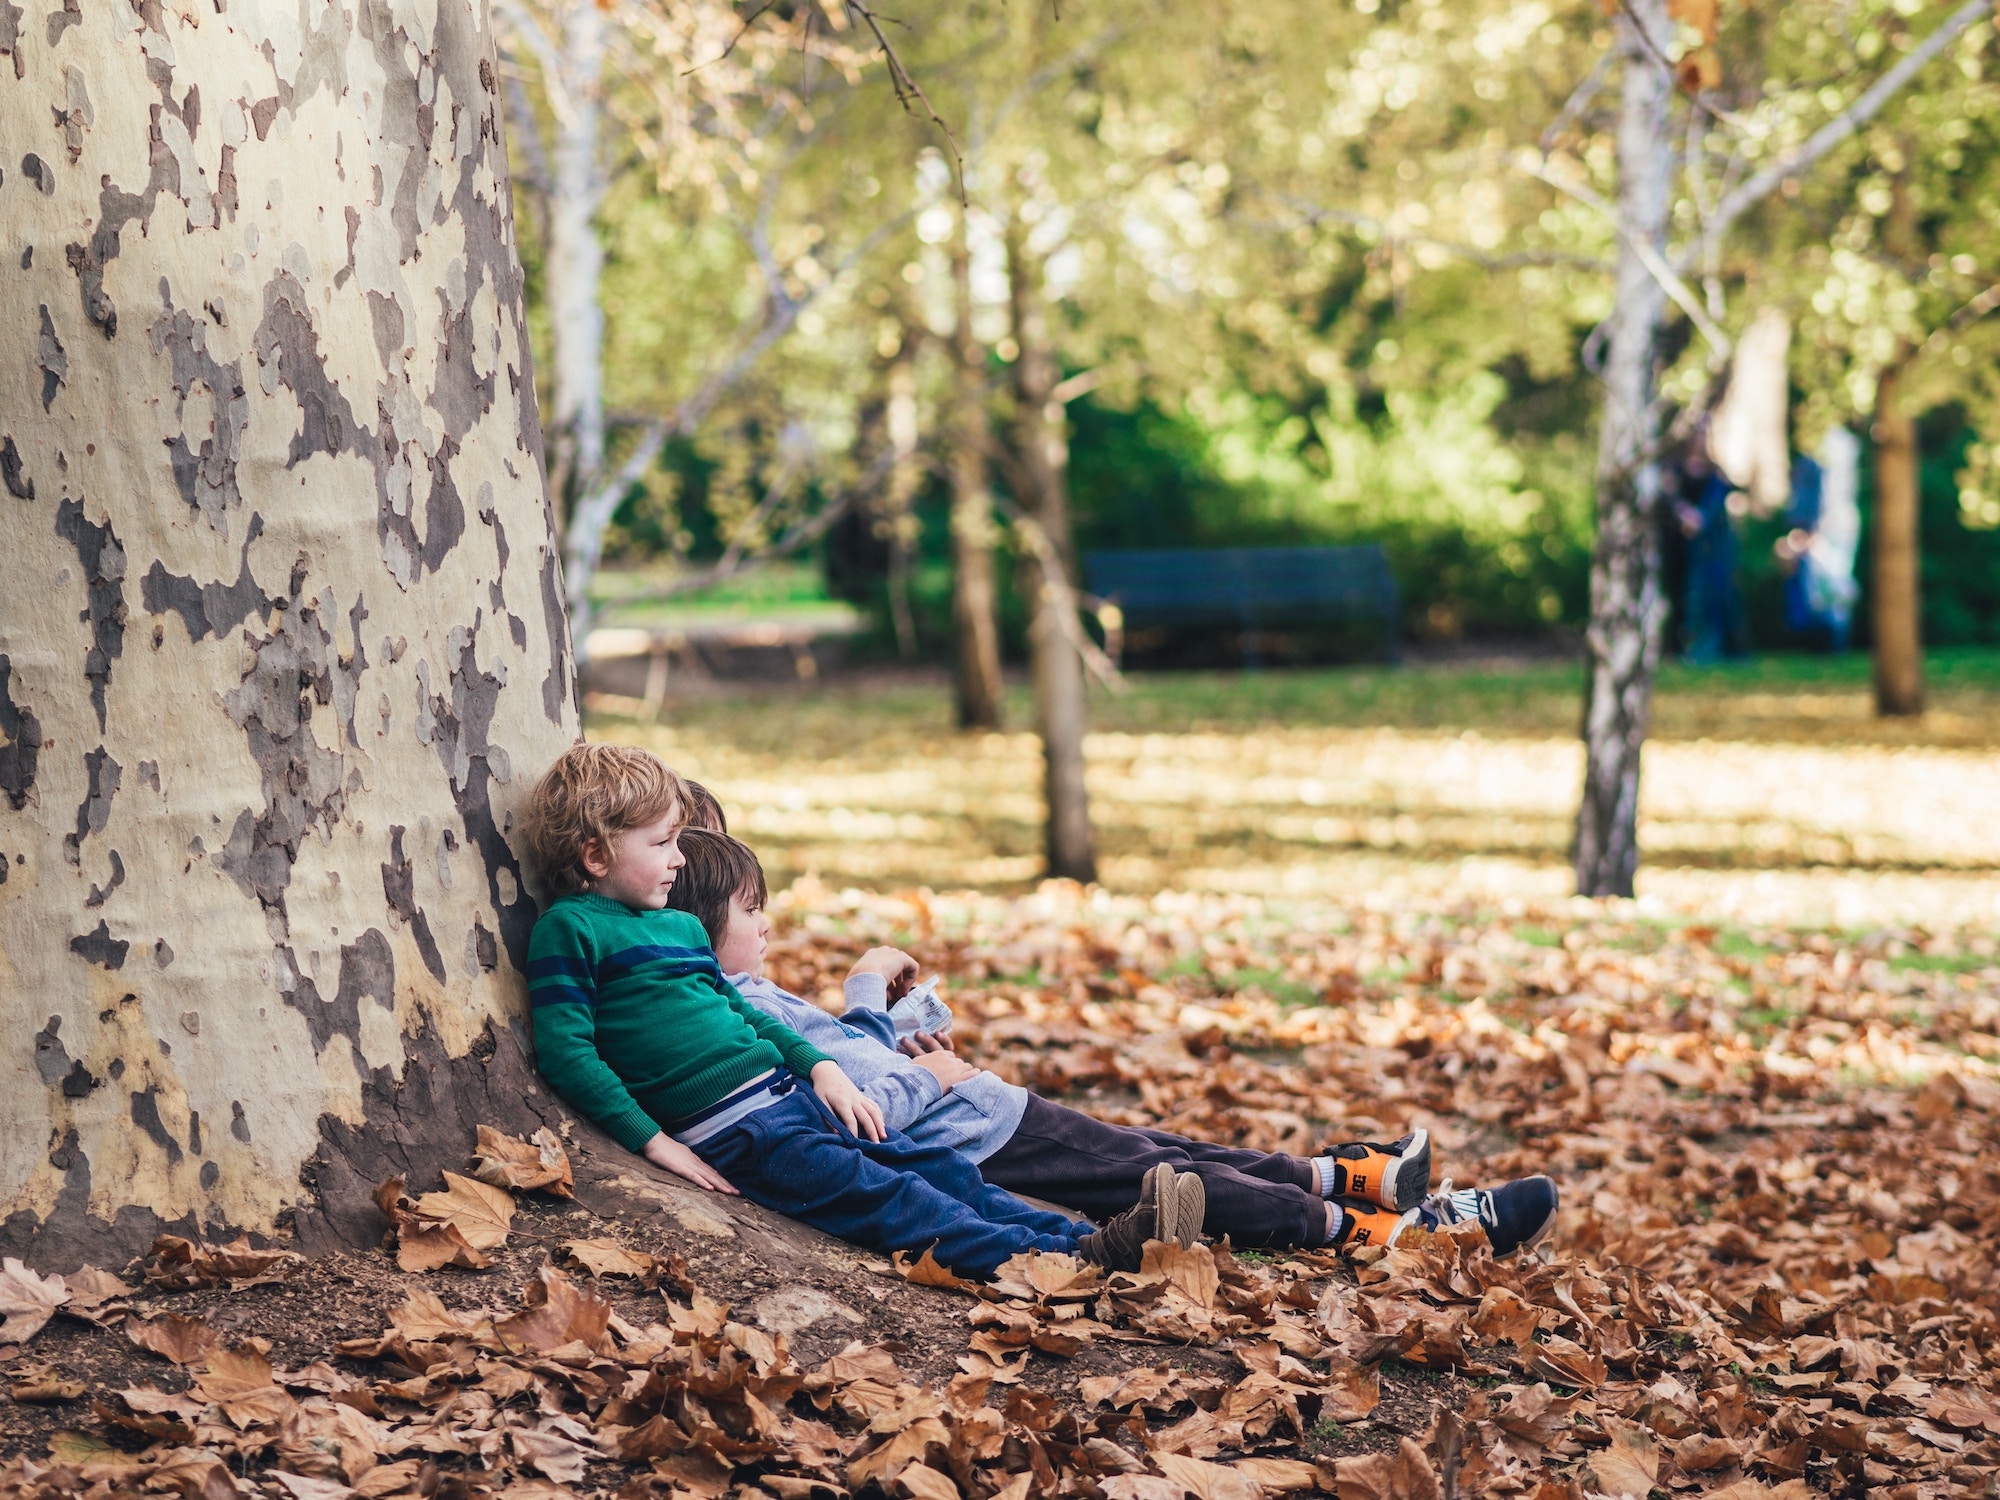 Three independent kids lying under a large tree in autumn